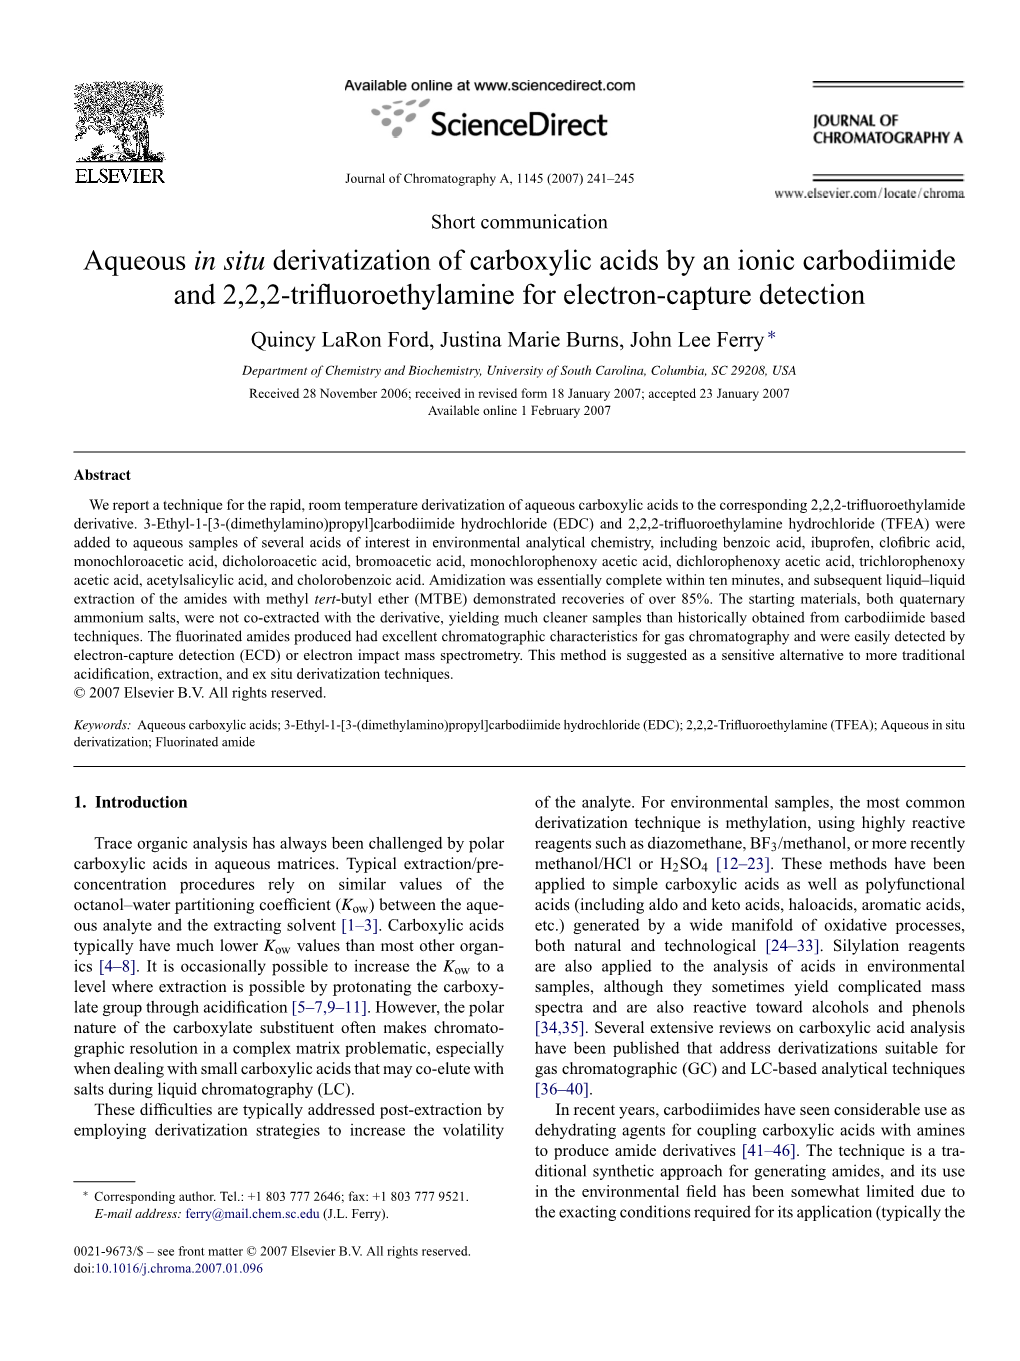 Aqueous in Situ Derivatization of Carboxylic Acids by an Ionic